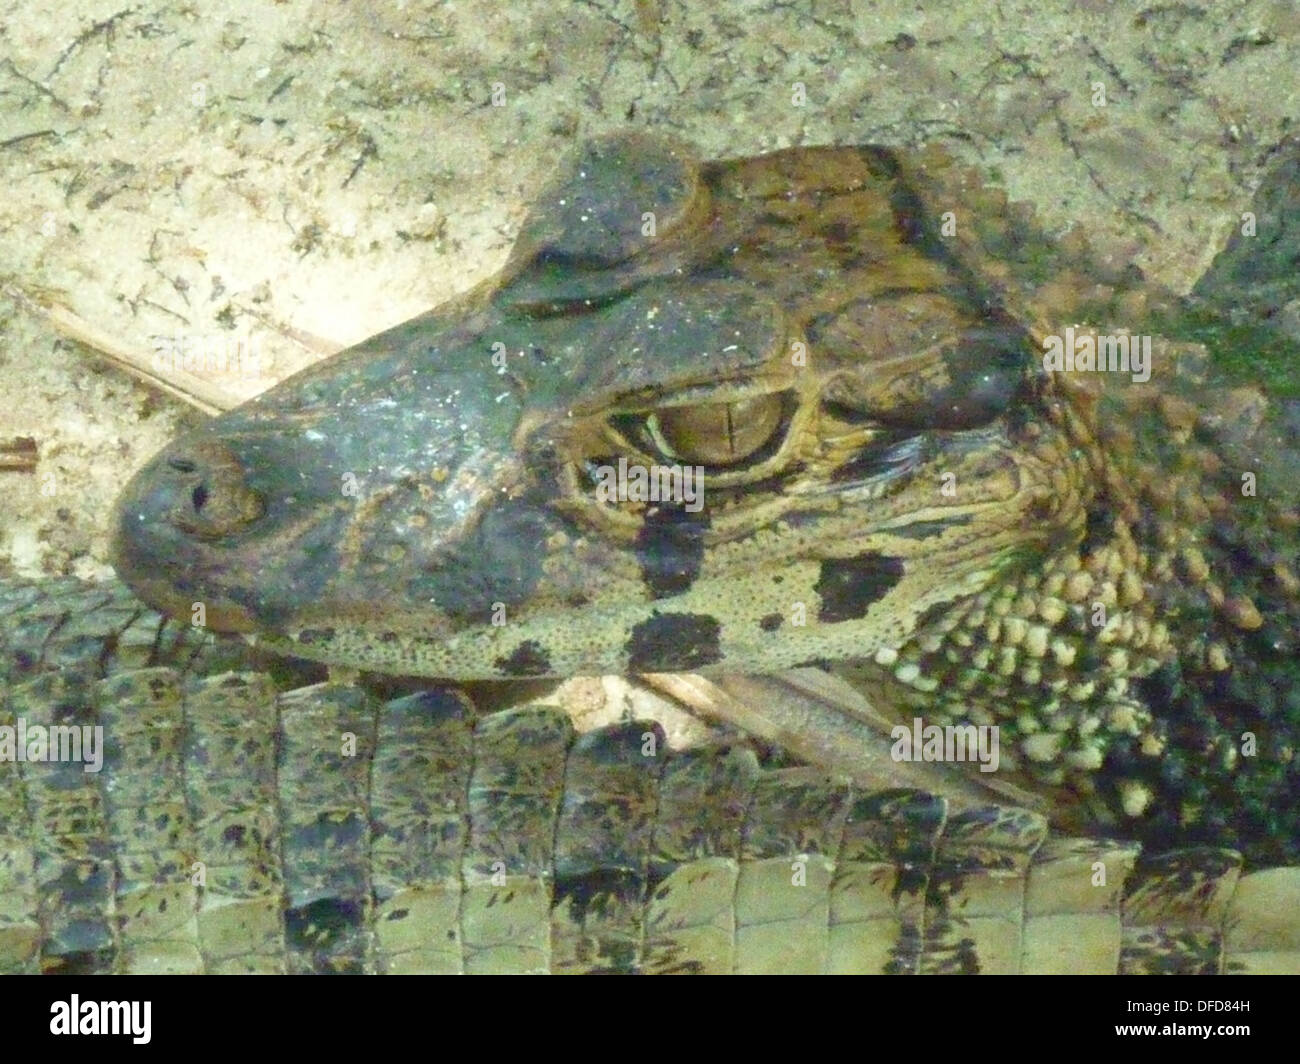 A young Caiman relaxes on the banks of the river Amazon near Iquitos, Peru Stock Photo